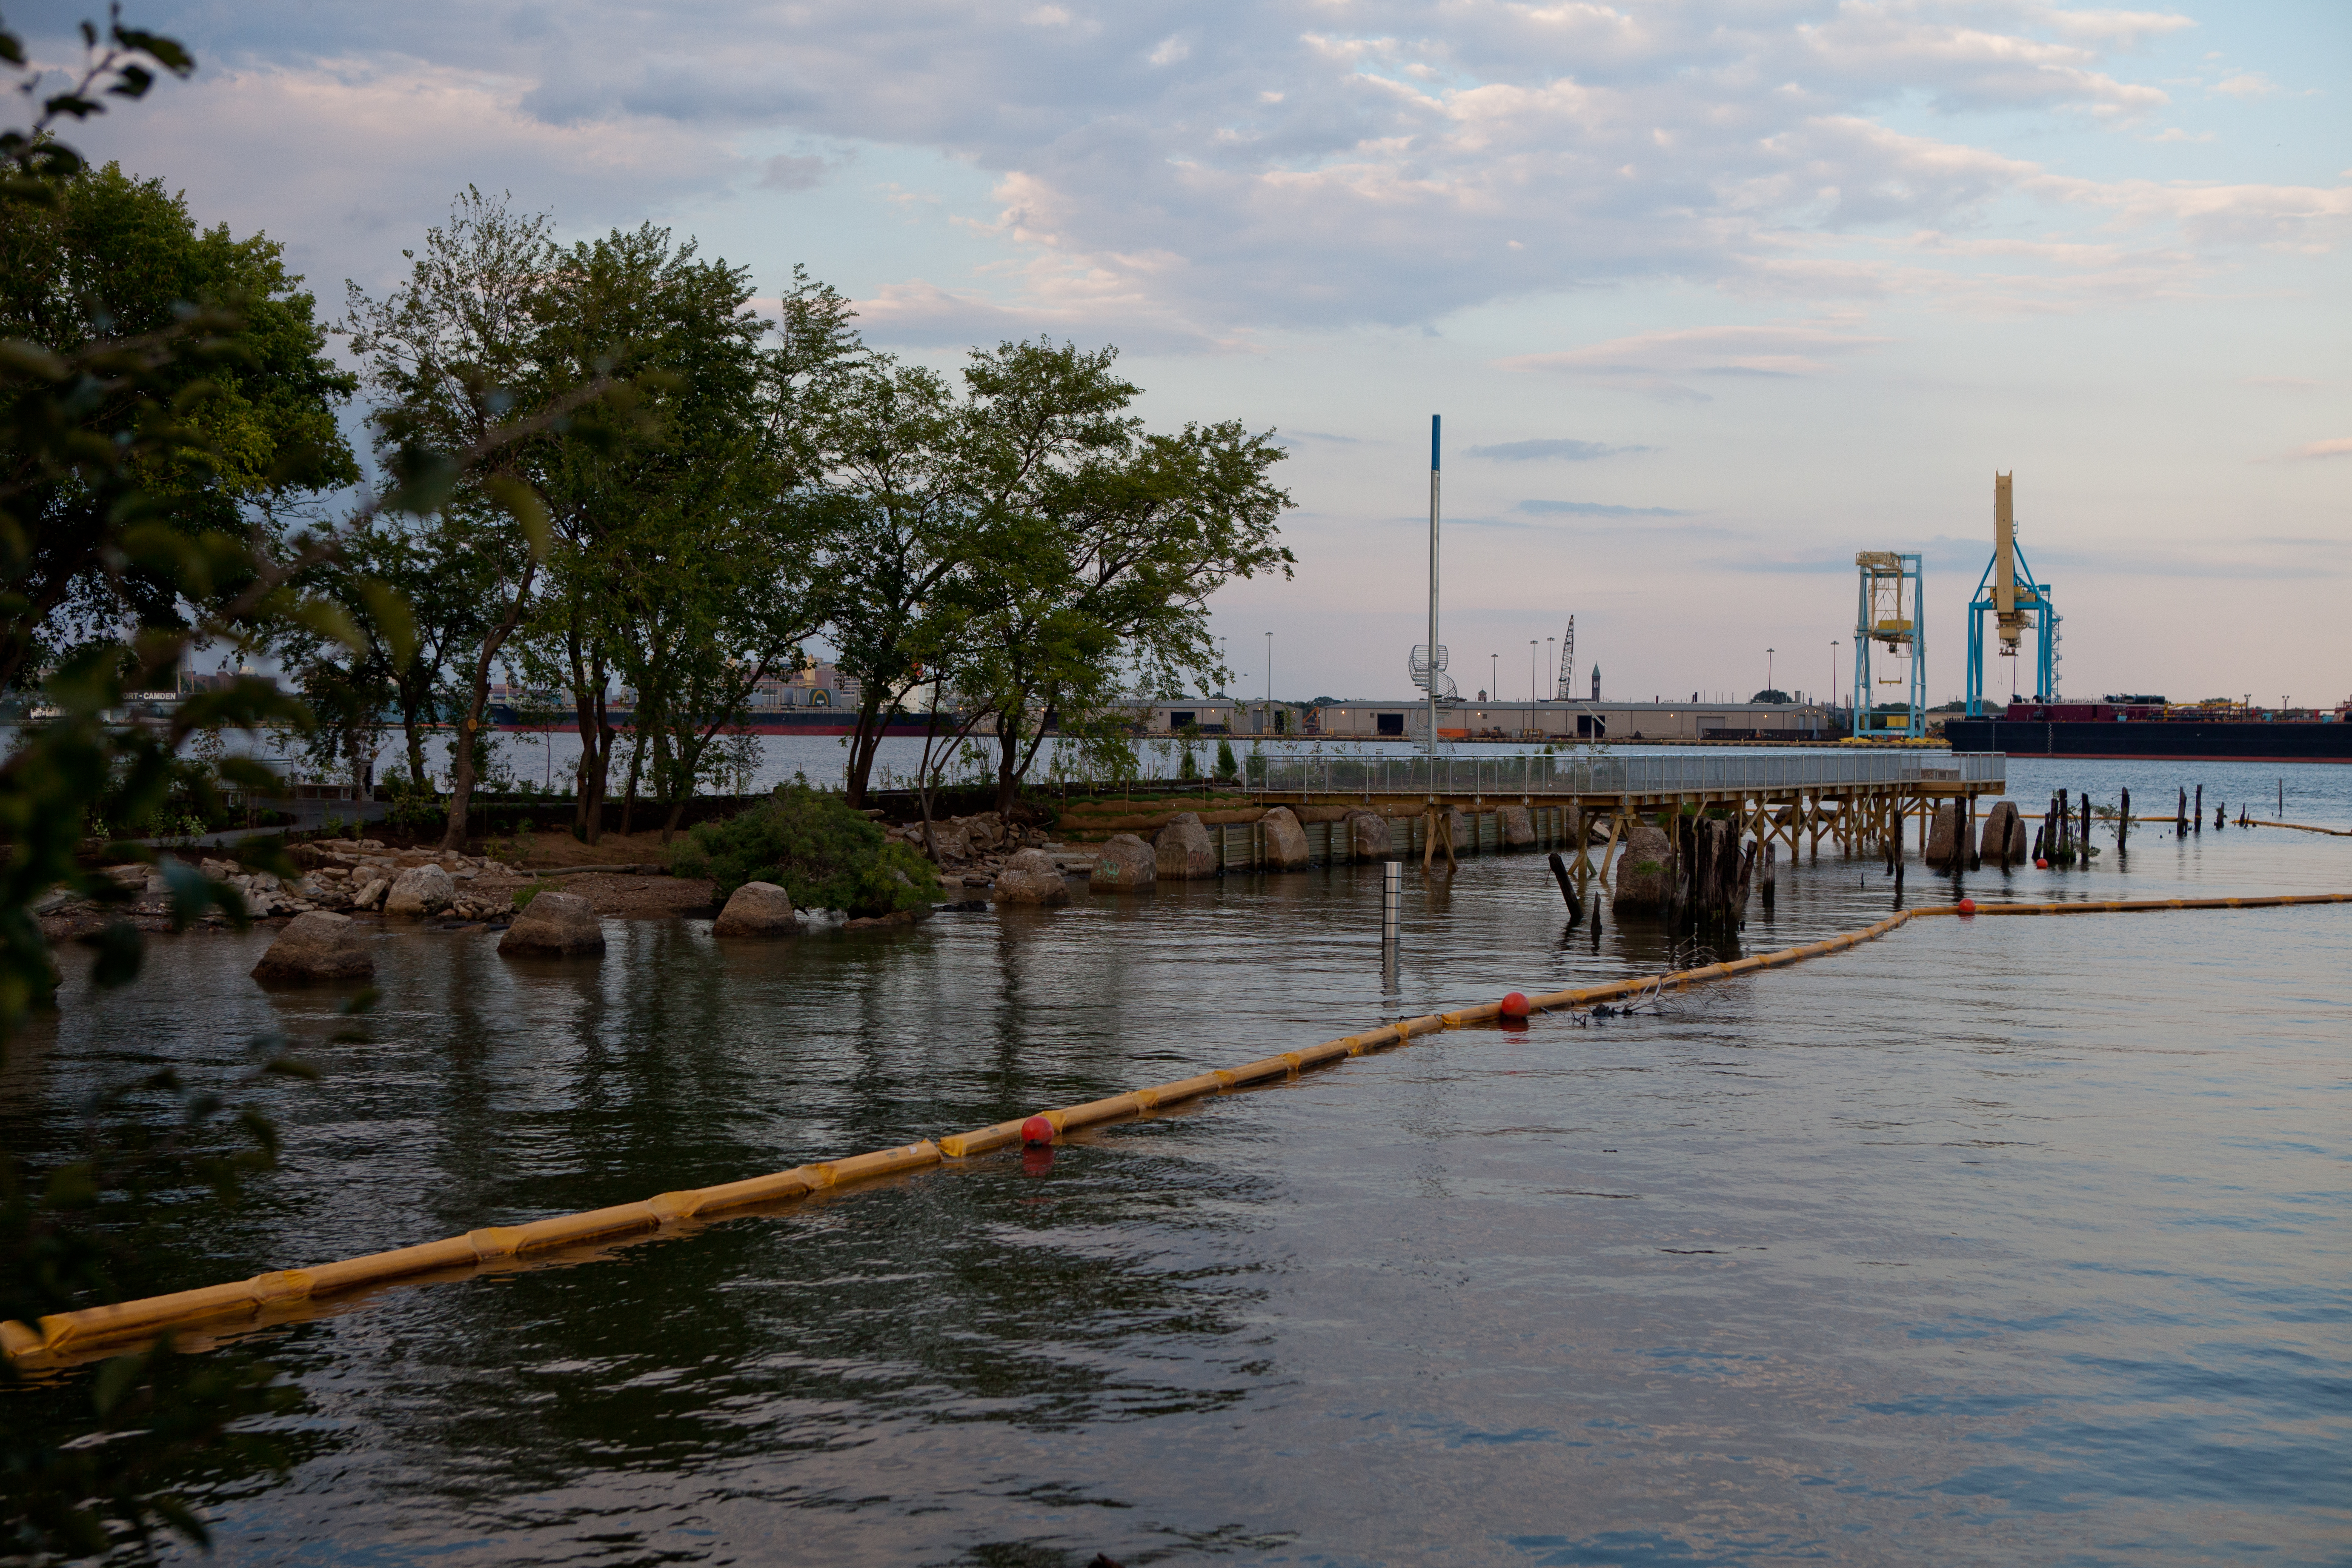 A view of the new Pier 53 park. Photo by Douglas Bovitt for DRWC.